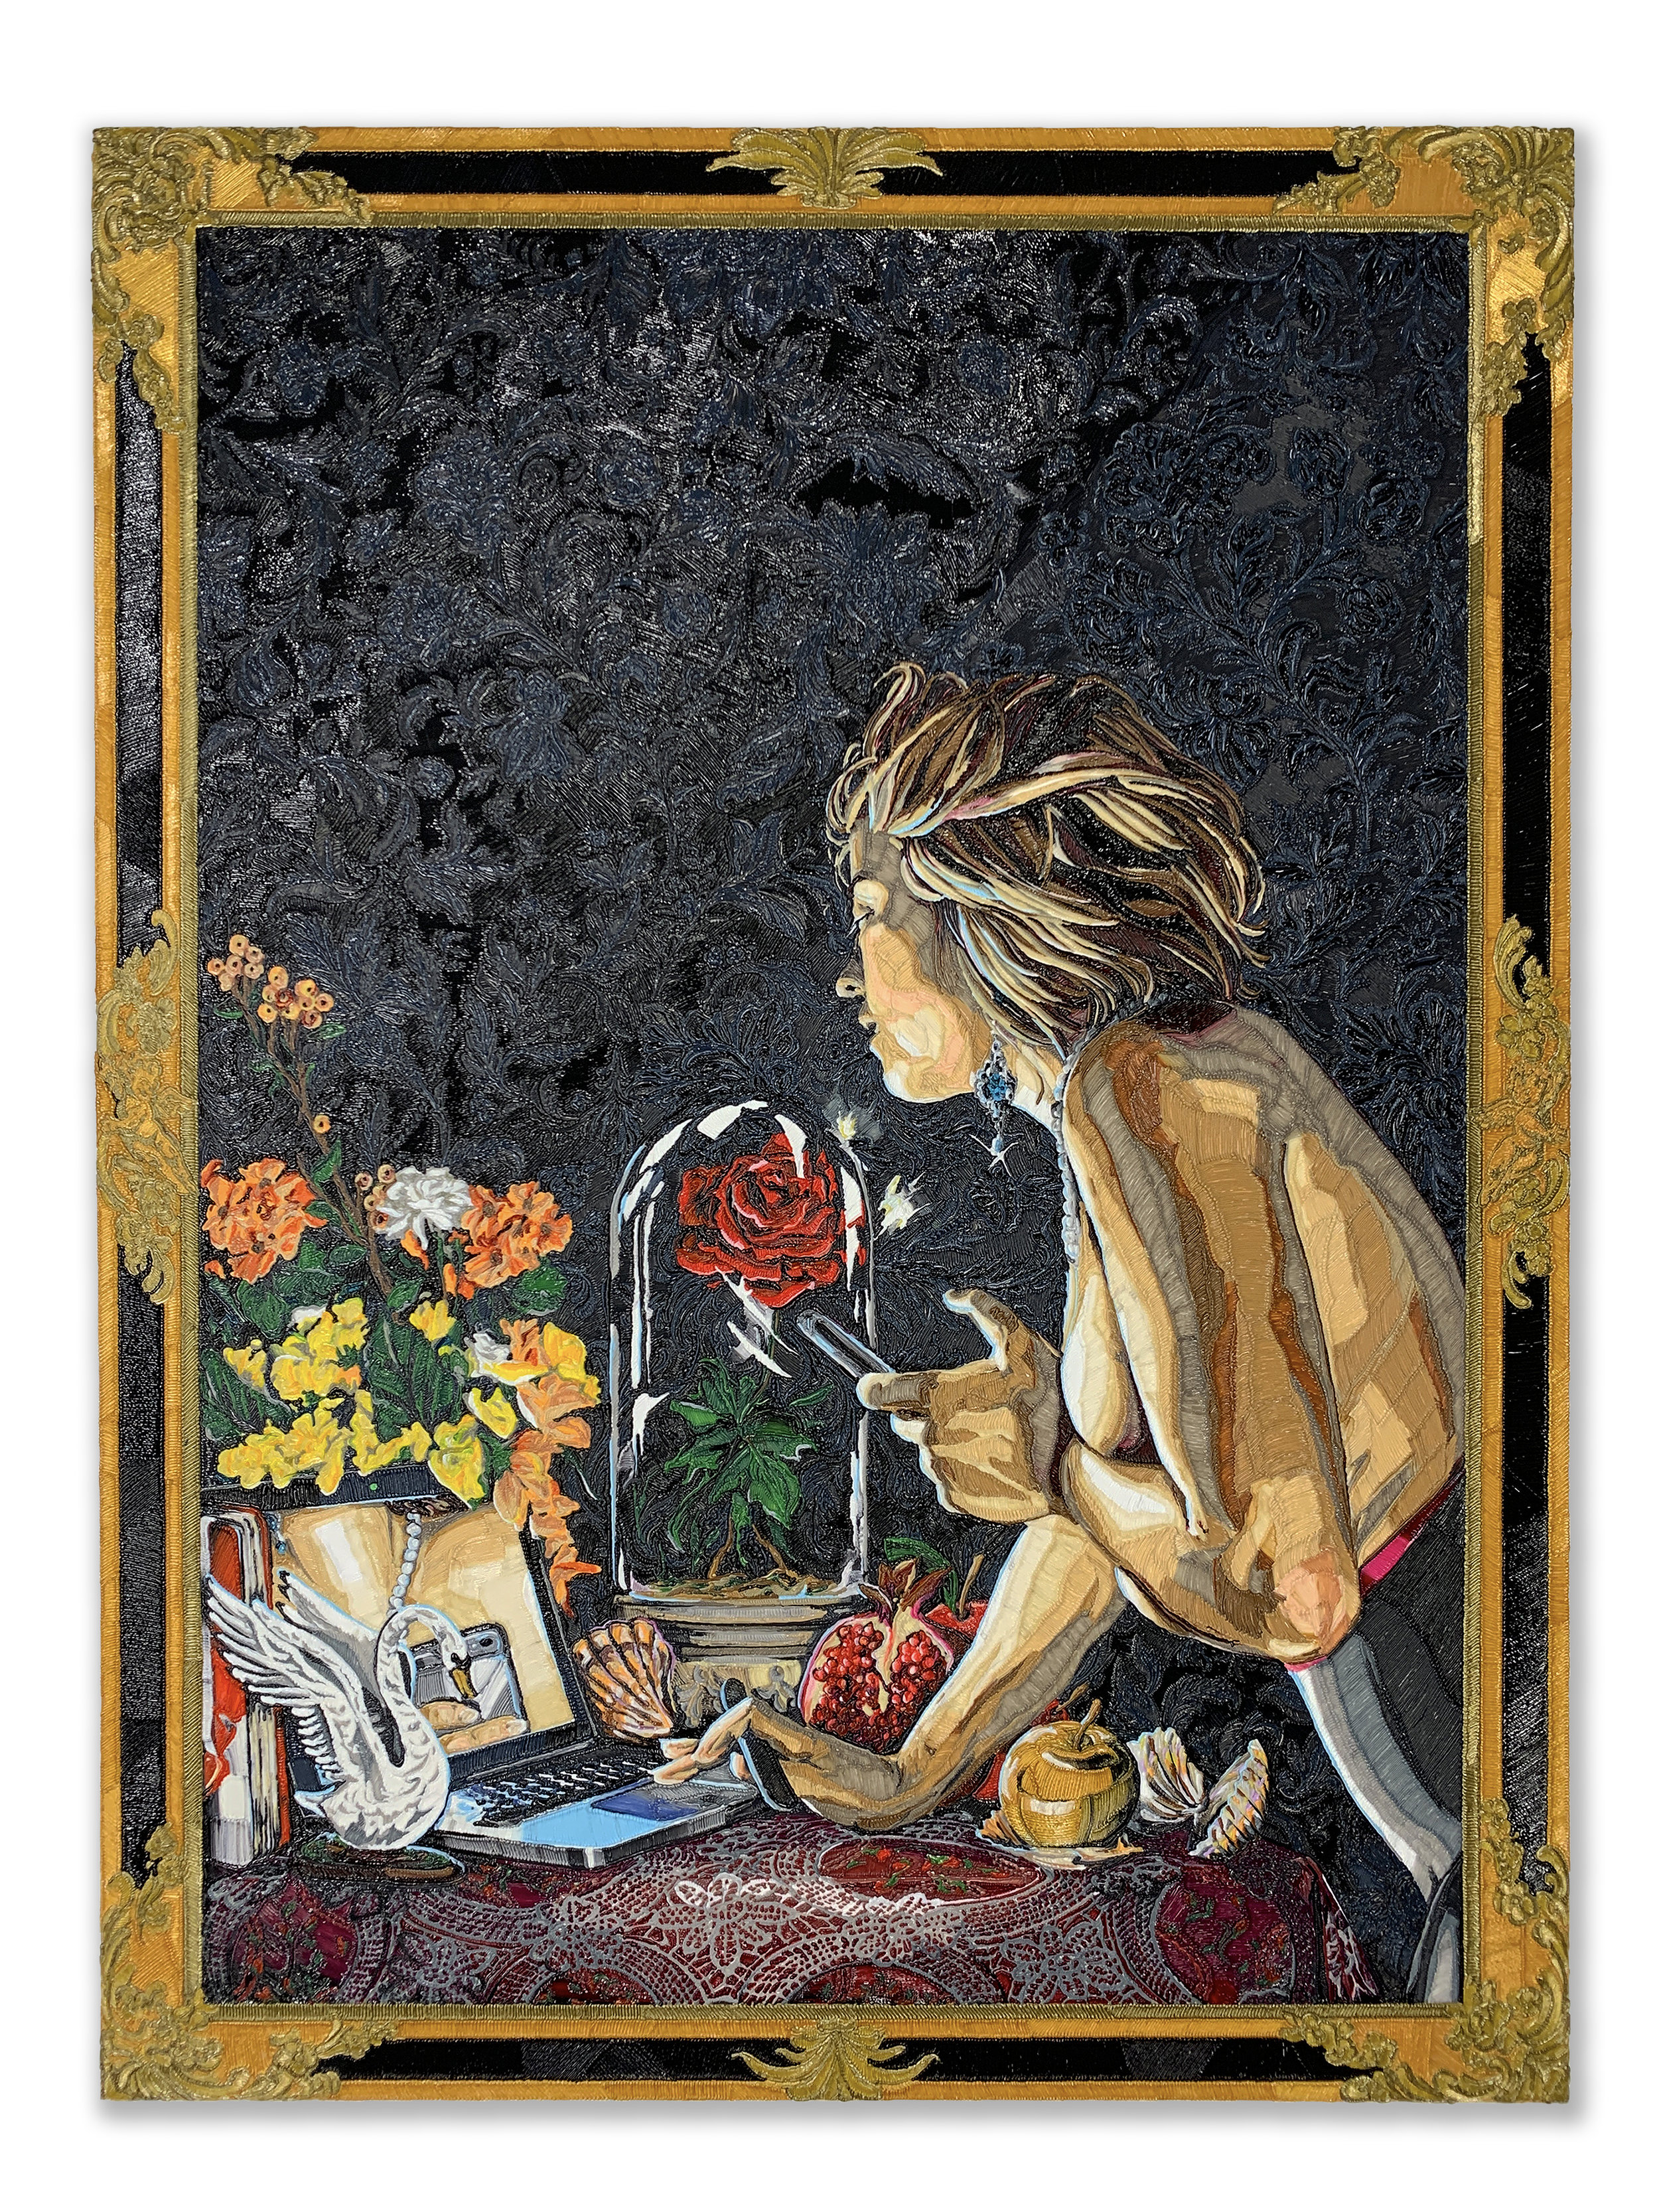  CATCHER, 2019  48 x 36 inches, PLA on panel 